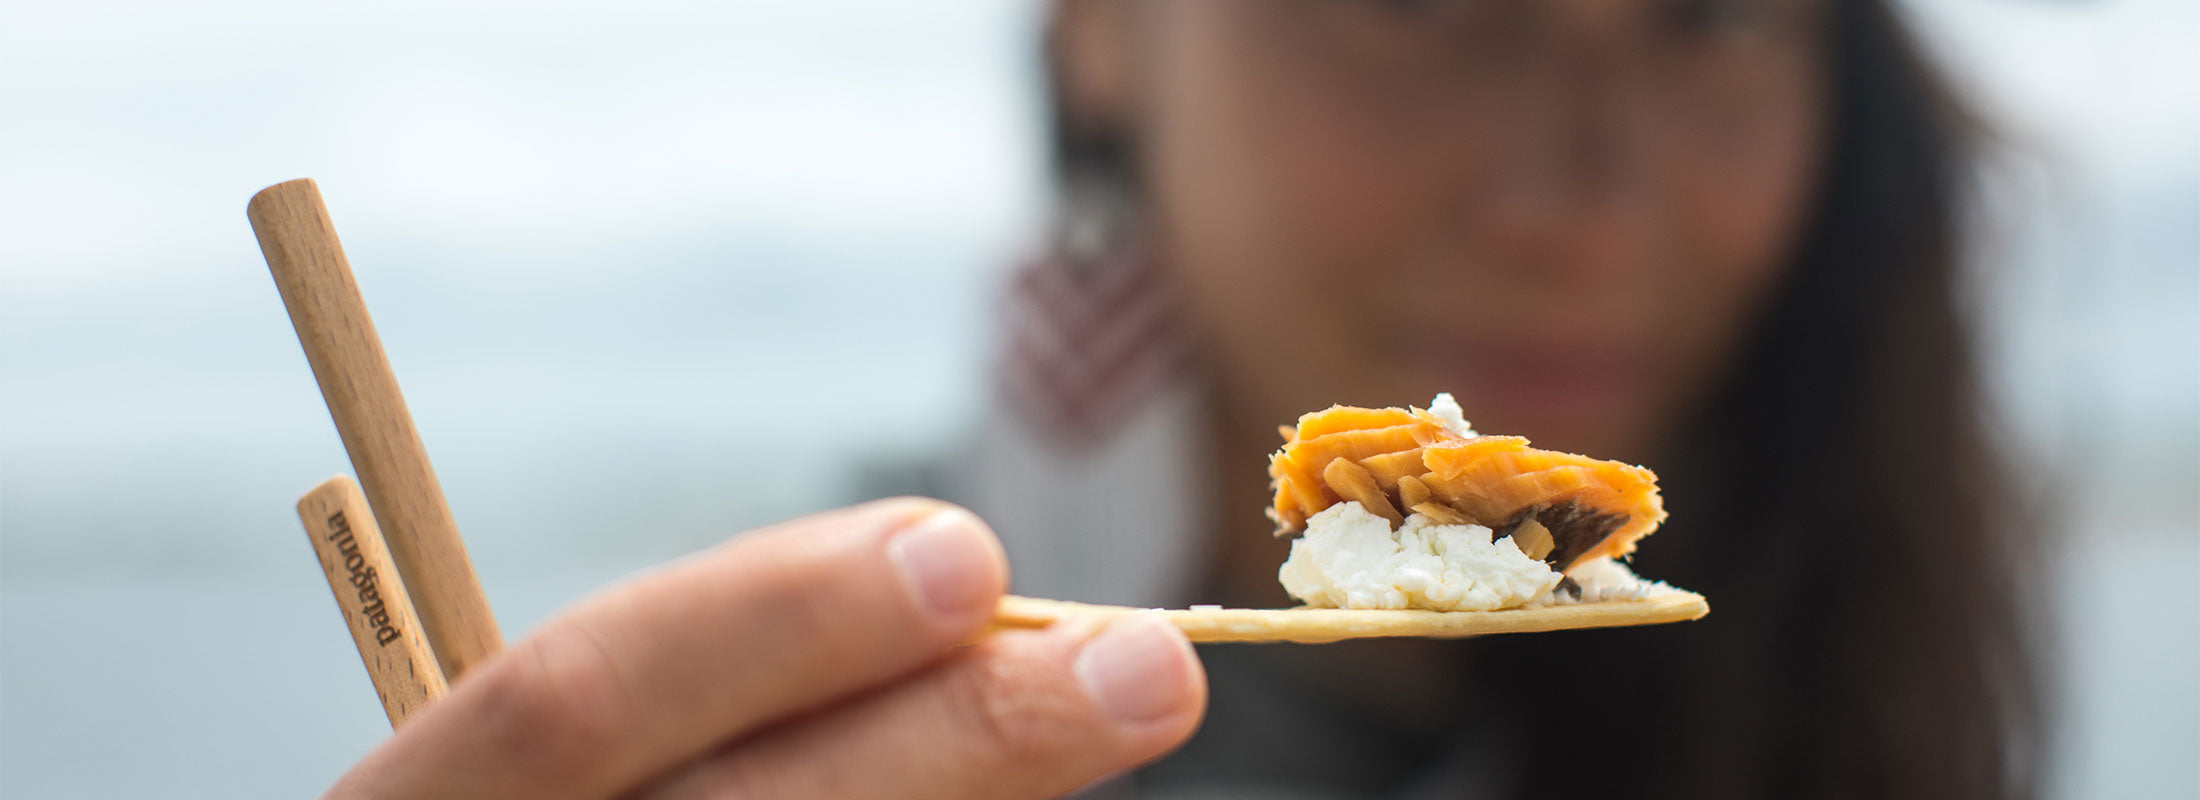 Juanita Ah Quin holds out a cracker topped with goat cheese and pink salmon